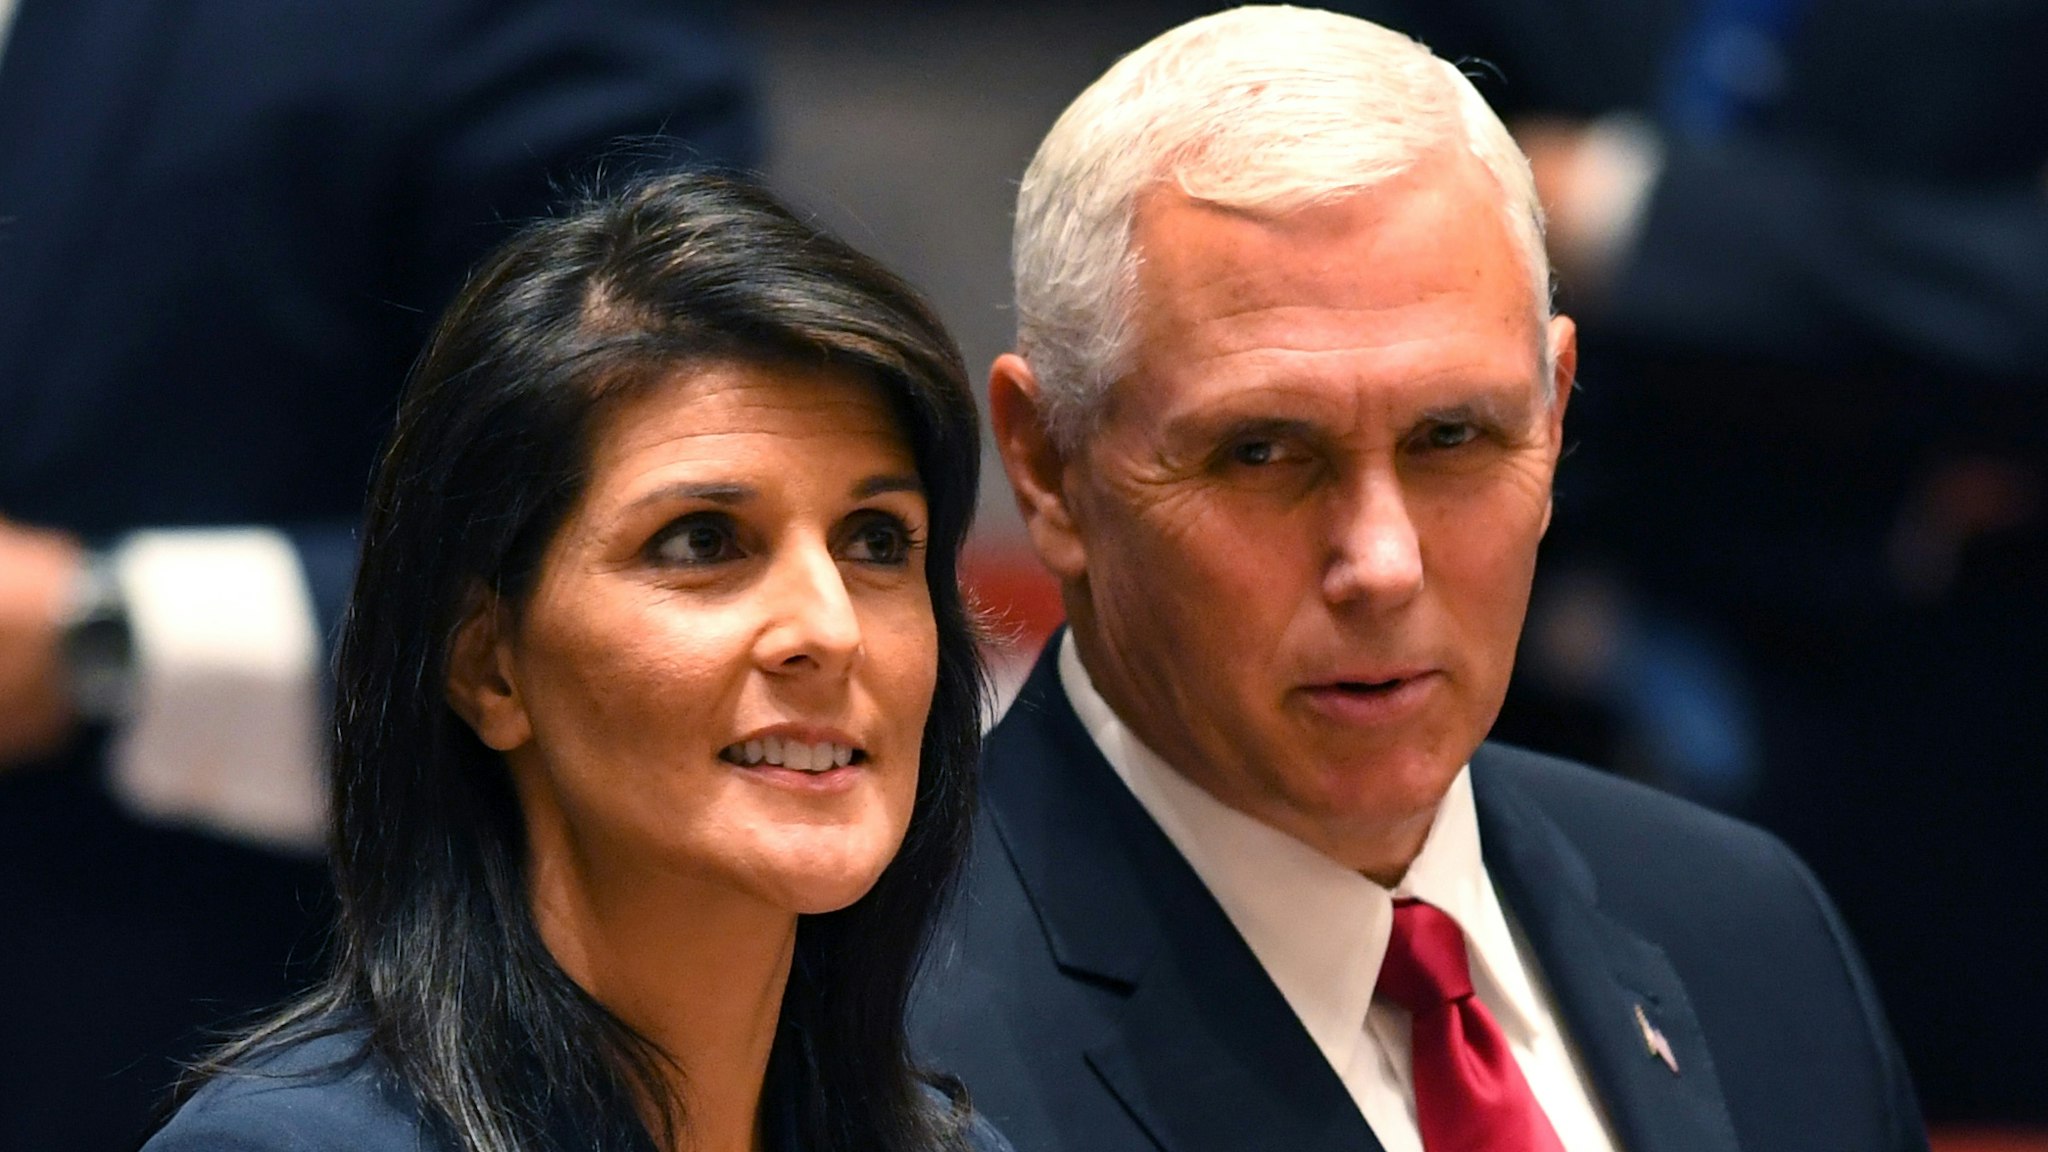 US Vice President Mike Pence (R) and Ambassador to the United Nations Nikki Haley attend a meeting of the UN Security Council on peacekeeping operations, during the 72nd session of the General Assembly in New York on September 20, 2017.